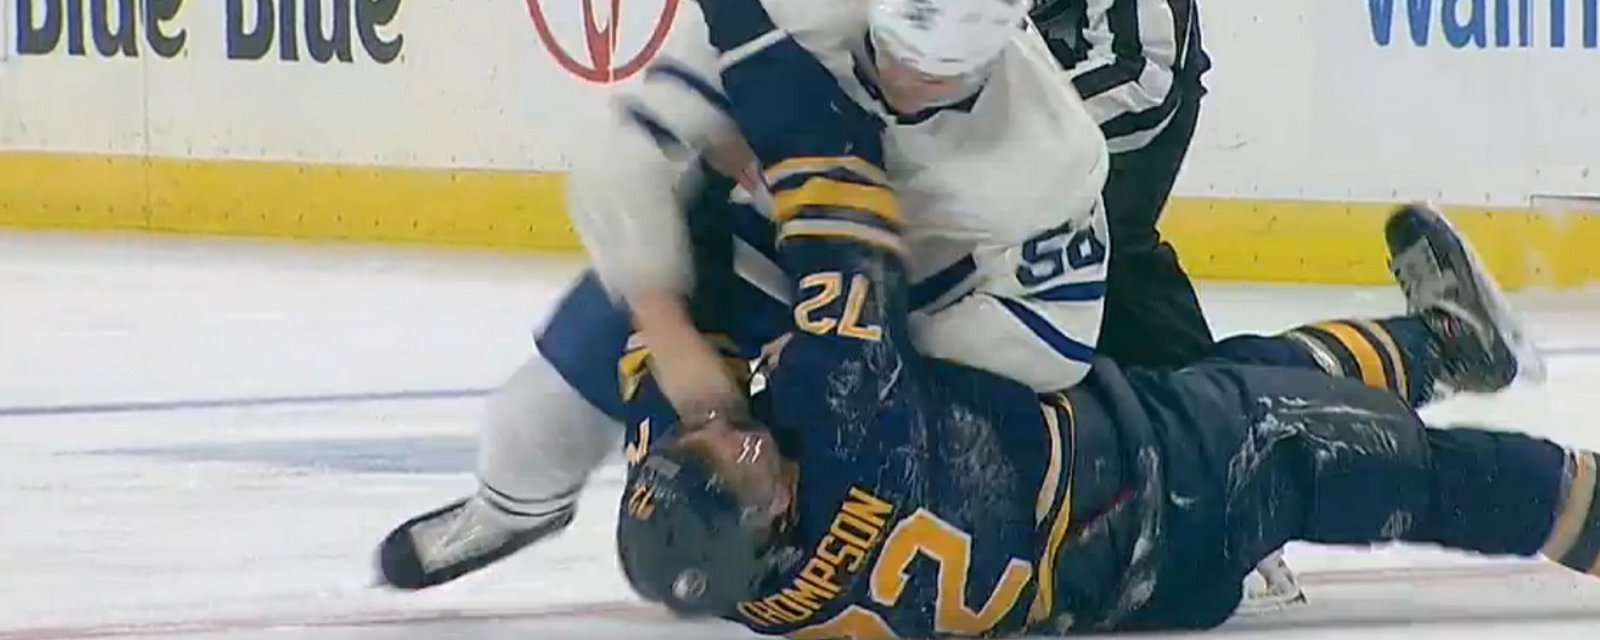 Leafs rookie delivers some ground &amp;amp; pound after dropping Thompson to the ice.